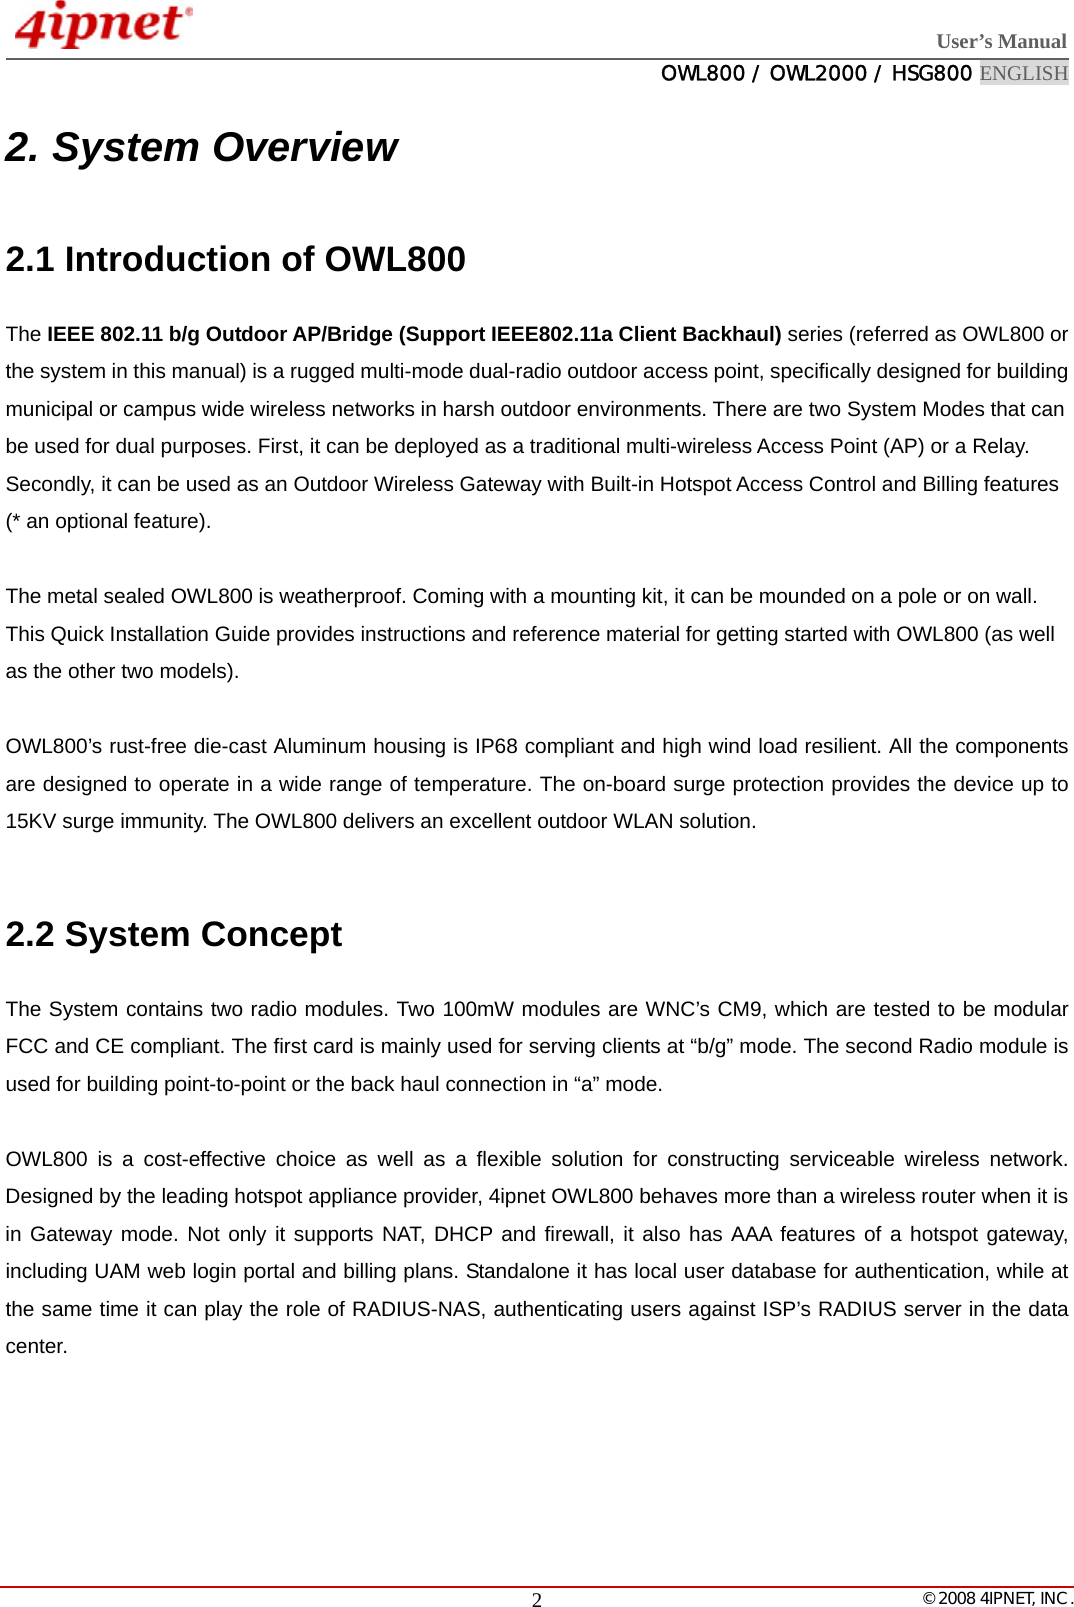  User’s Manual  OWL800 / OWL2000 / HSG800 ENGLISH   © 2008 4IPNET, INC.  22. System Overview 2.1 Introduction of OWL800 The IEEE 802.11 b/g Outdoor AP/Bridge (Support IEEE802.11a Client Backhaul) series (referred as OWL800 or the system in this manual) is a rugged multi-mode dual-radio outdoor access point, specifically designed for building municipal or campus wide wireless networks in harsh outdoor environments. There are two System Modes that can be used for dual purposes. First, it can be deployed as a traditional multi-wireless Access Point (AP) or a Relay. Secondly, it can be used as an Outdoor Wireless Gateway with Built-in Hotspot Access Control and Billing features (* an optional feature).    The metal sealed OWL800 is weatherproof. Coming with a mounting kit, it can be mounded on a pole or on wall. This Quick Installation Guide provides instructions and reference material for getting started with OWL800 (as well as the other two models).  OWL800’s rust-free die-cast Aluminum housing is IP68 compliant and high wind load resilient. All the components are designed to operate in a wide range of temperature. The on-board surge protection provides the device up to 15KV surge immunity. The OWL800 delivers an excellent outdoor WLAN solution.  2.2 System Concept The System contains two radio modules. Two 100mW modules are WNC’s CM9, which are tested to be modular FCC and CE compliant. The first card is mainly used for serving clients at “b/g” mode. The second Radio module is used for building point-to-point or the back haul connection in “a” mode.    OWL800 is a cost-effective choice as well as a flexible solution for constructing serviceable wireless network. Designed by the leading hotspot appliance provider, 4ipnet OWL800 behaves more than a wireless router when it is in Gateway mode. Not only it supports NAT, DHCP and firewall, it also has AAA features of a hotspot gateway, including UAM web login portal and billing plans. Standalone it has local user database for authentication, while at the same time it can play the role of RADIUS-NAS, authenticating users against ISP’s RADIUS server in the data center.   